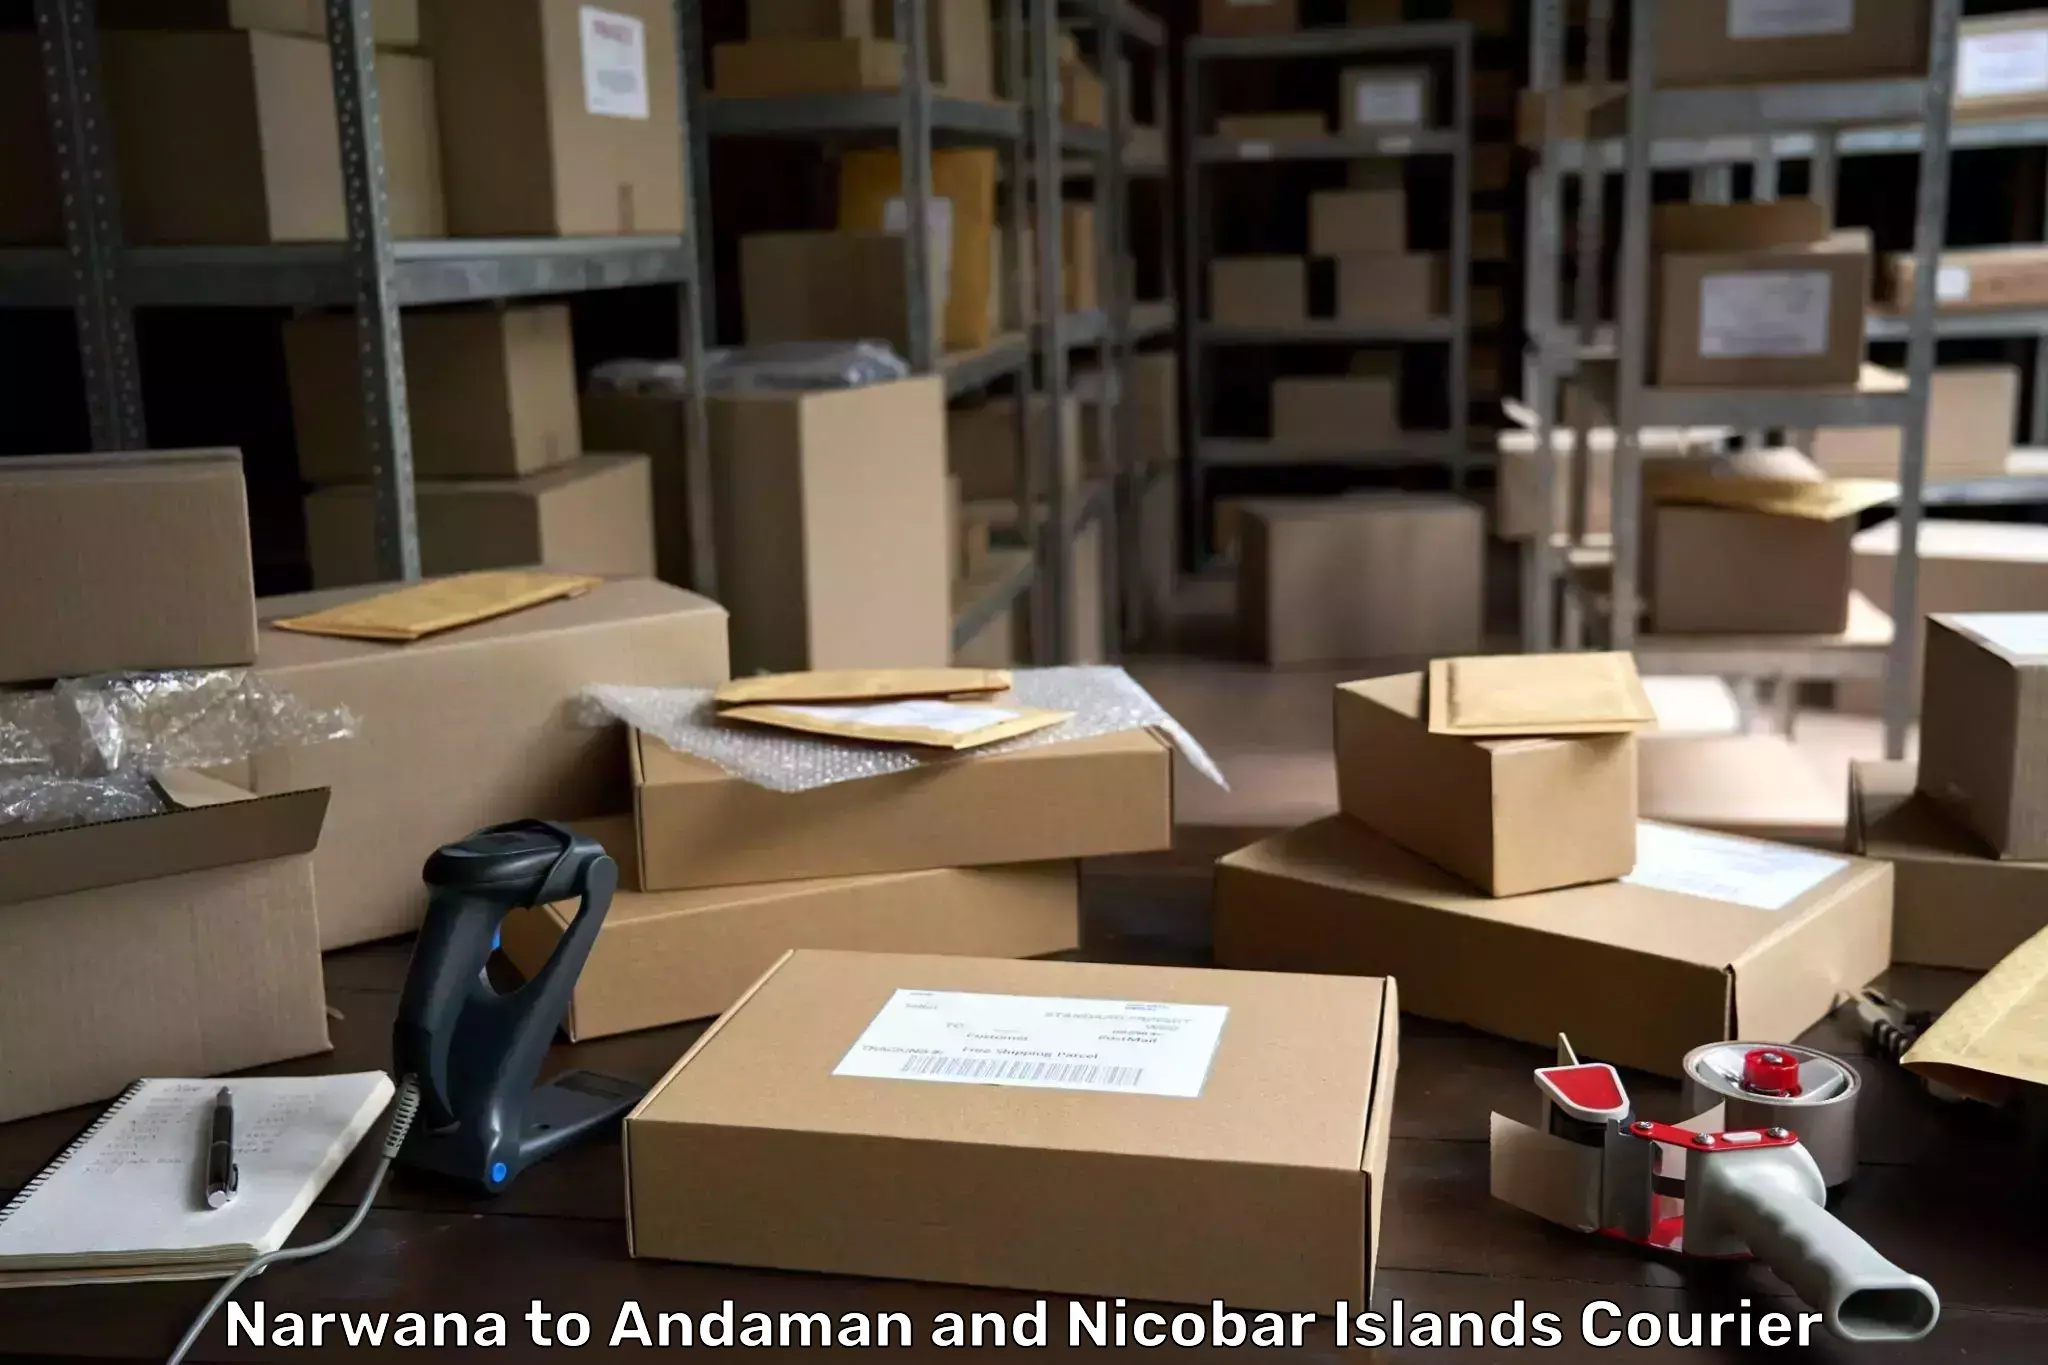 User-friendly delivery service Narwana to Andaman and Nicobar Islands